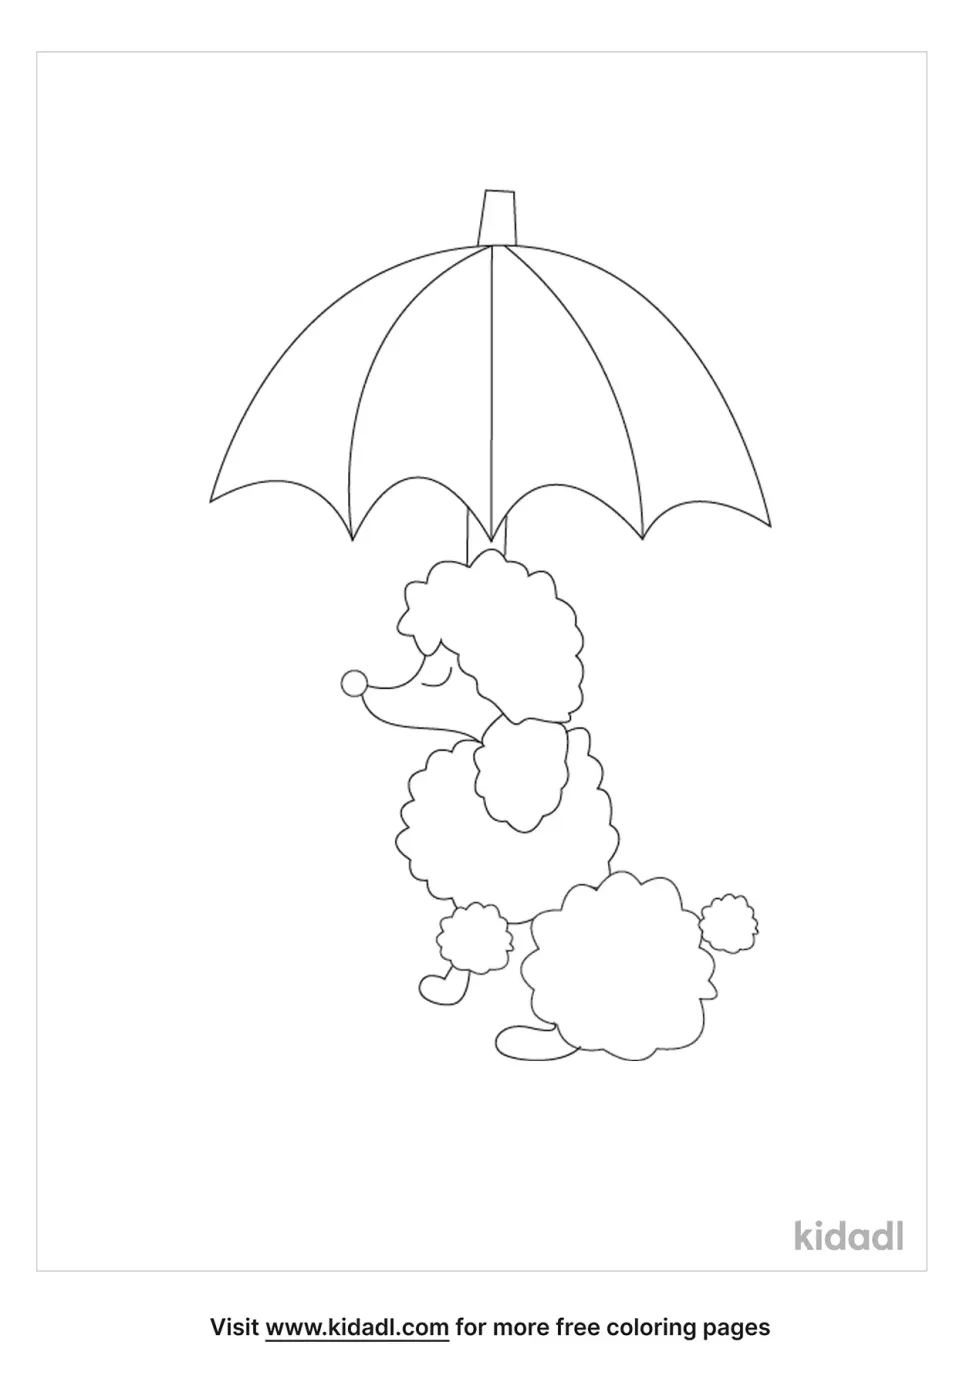 French Poodle With Umbrella Coloring Page